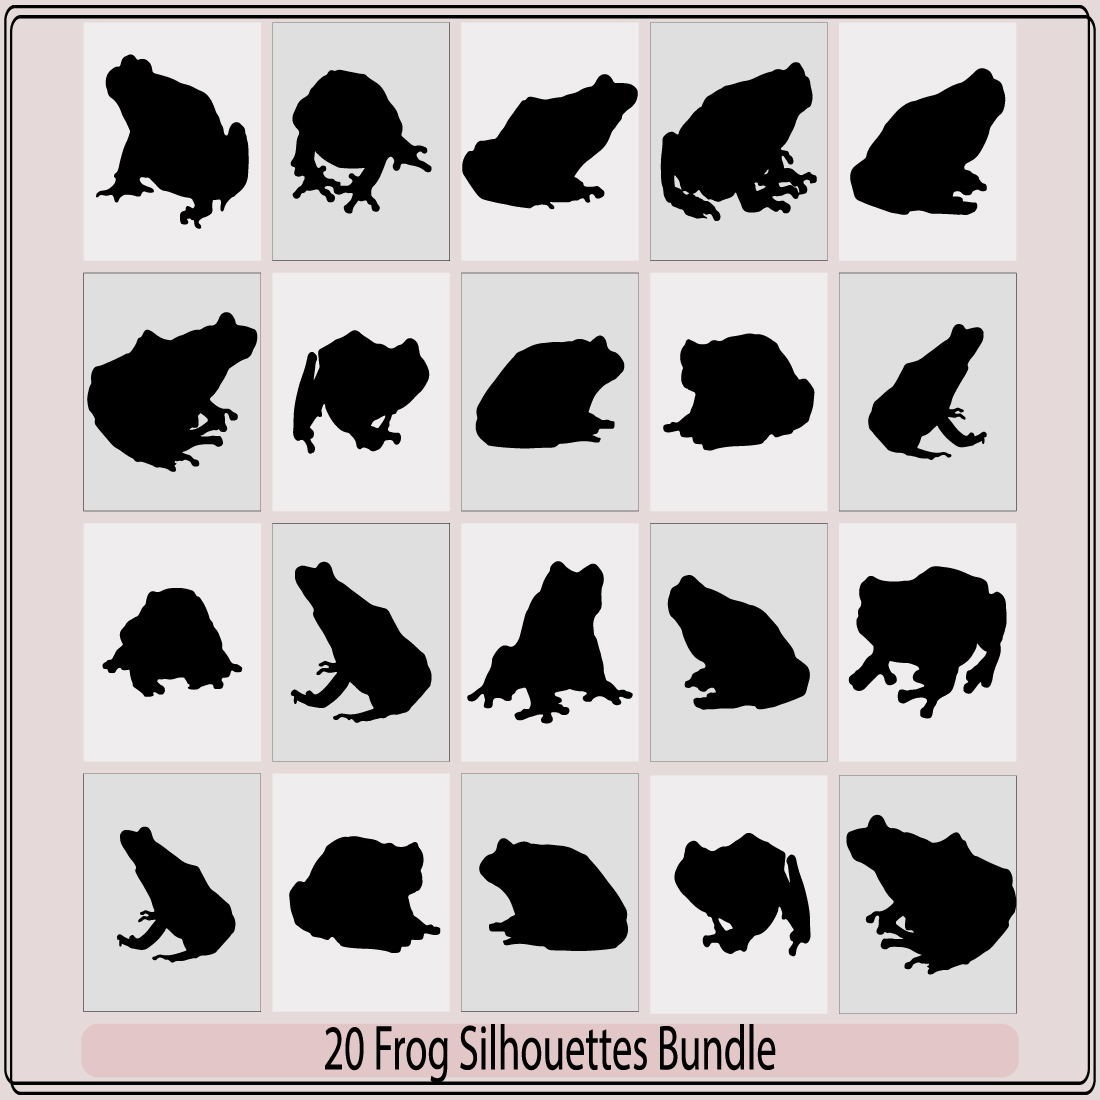 Frog Silhouette,Silhouettes frog-vector,Tree frog silhouette vector,Vector hand drawn frog silhouette preview image.